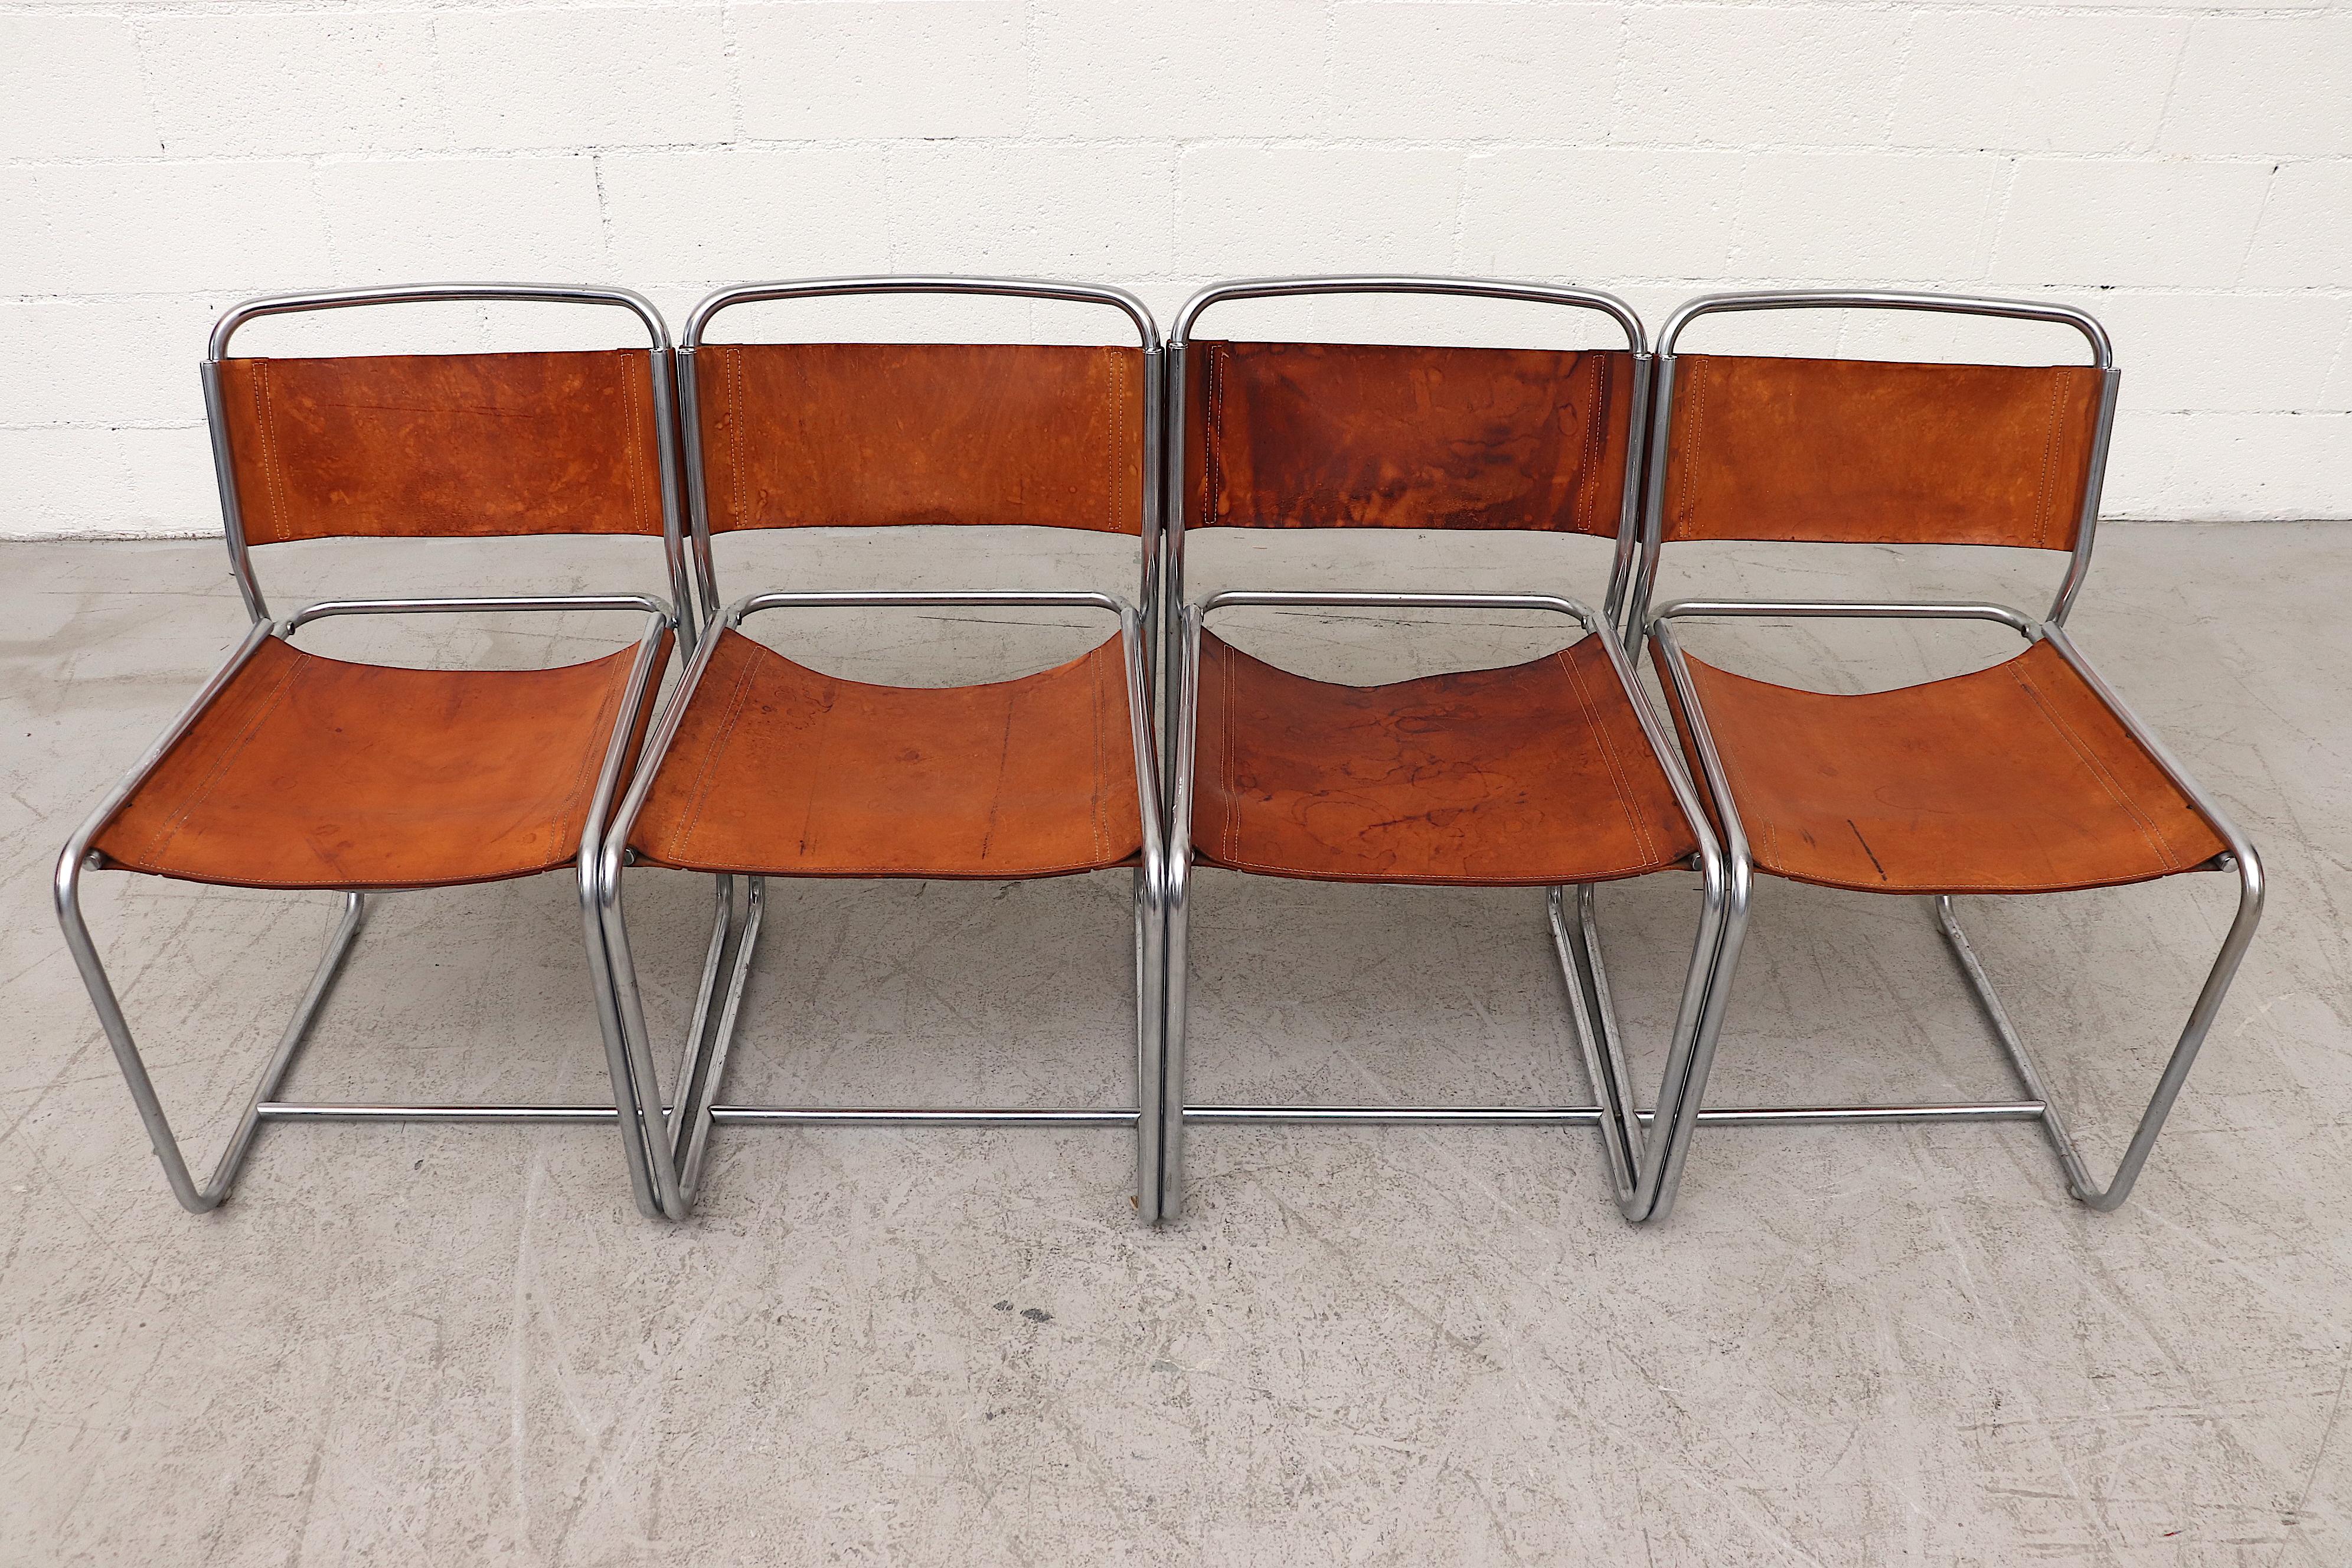 Rare set of Claire Bataille and Paul Ibens Model SE18 leather dining chairs for 't Spectrum, Netherlands, 1971. Nickel plated tubular steel frames with original saddle leather seating visible patina, with heavy staining and wear. Stunning minimal